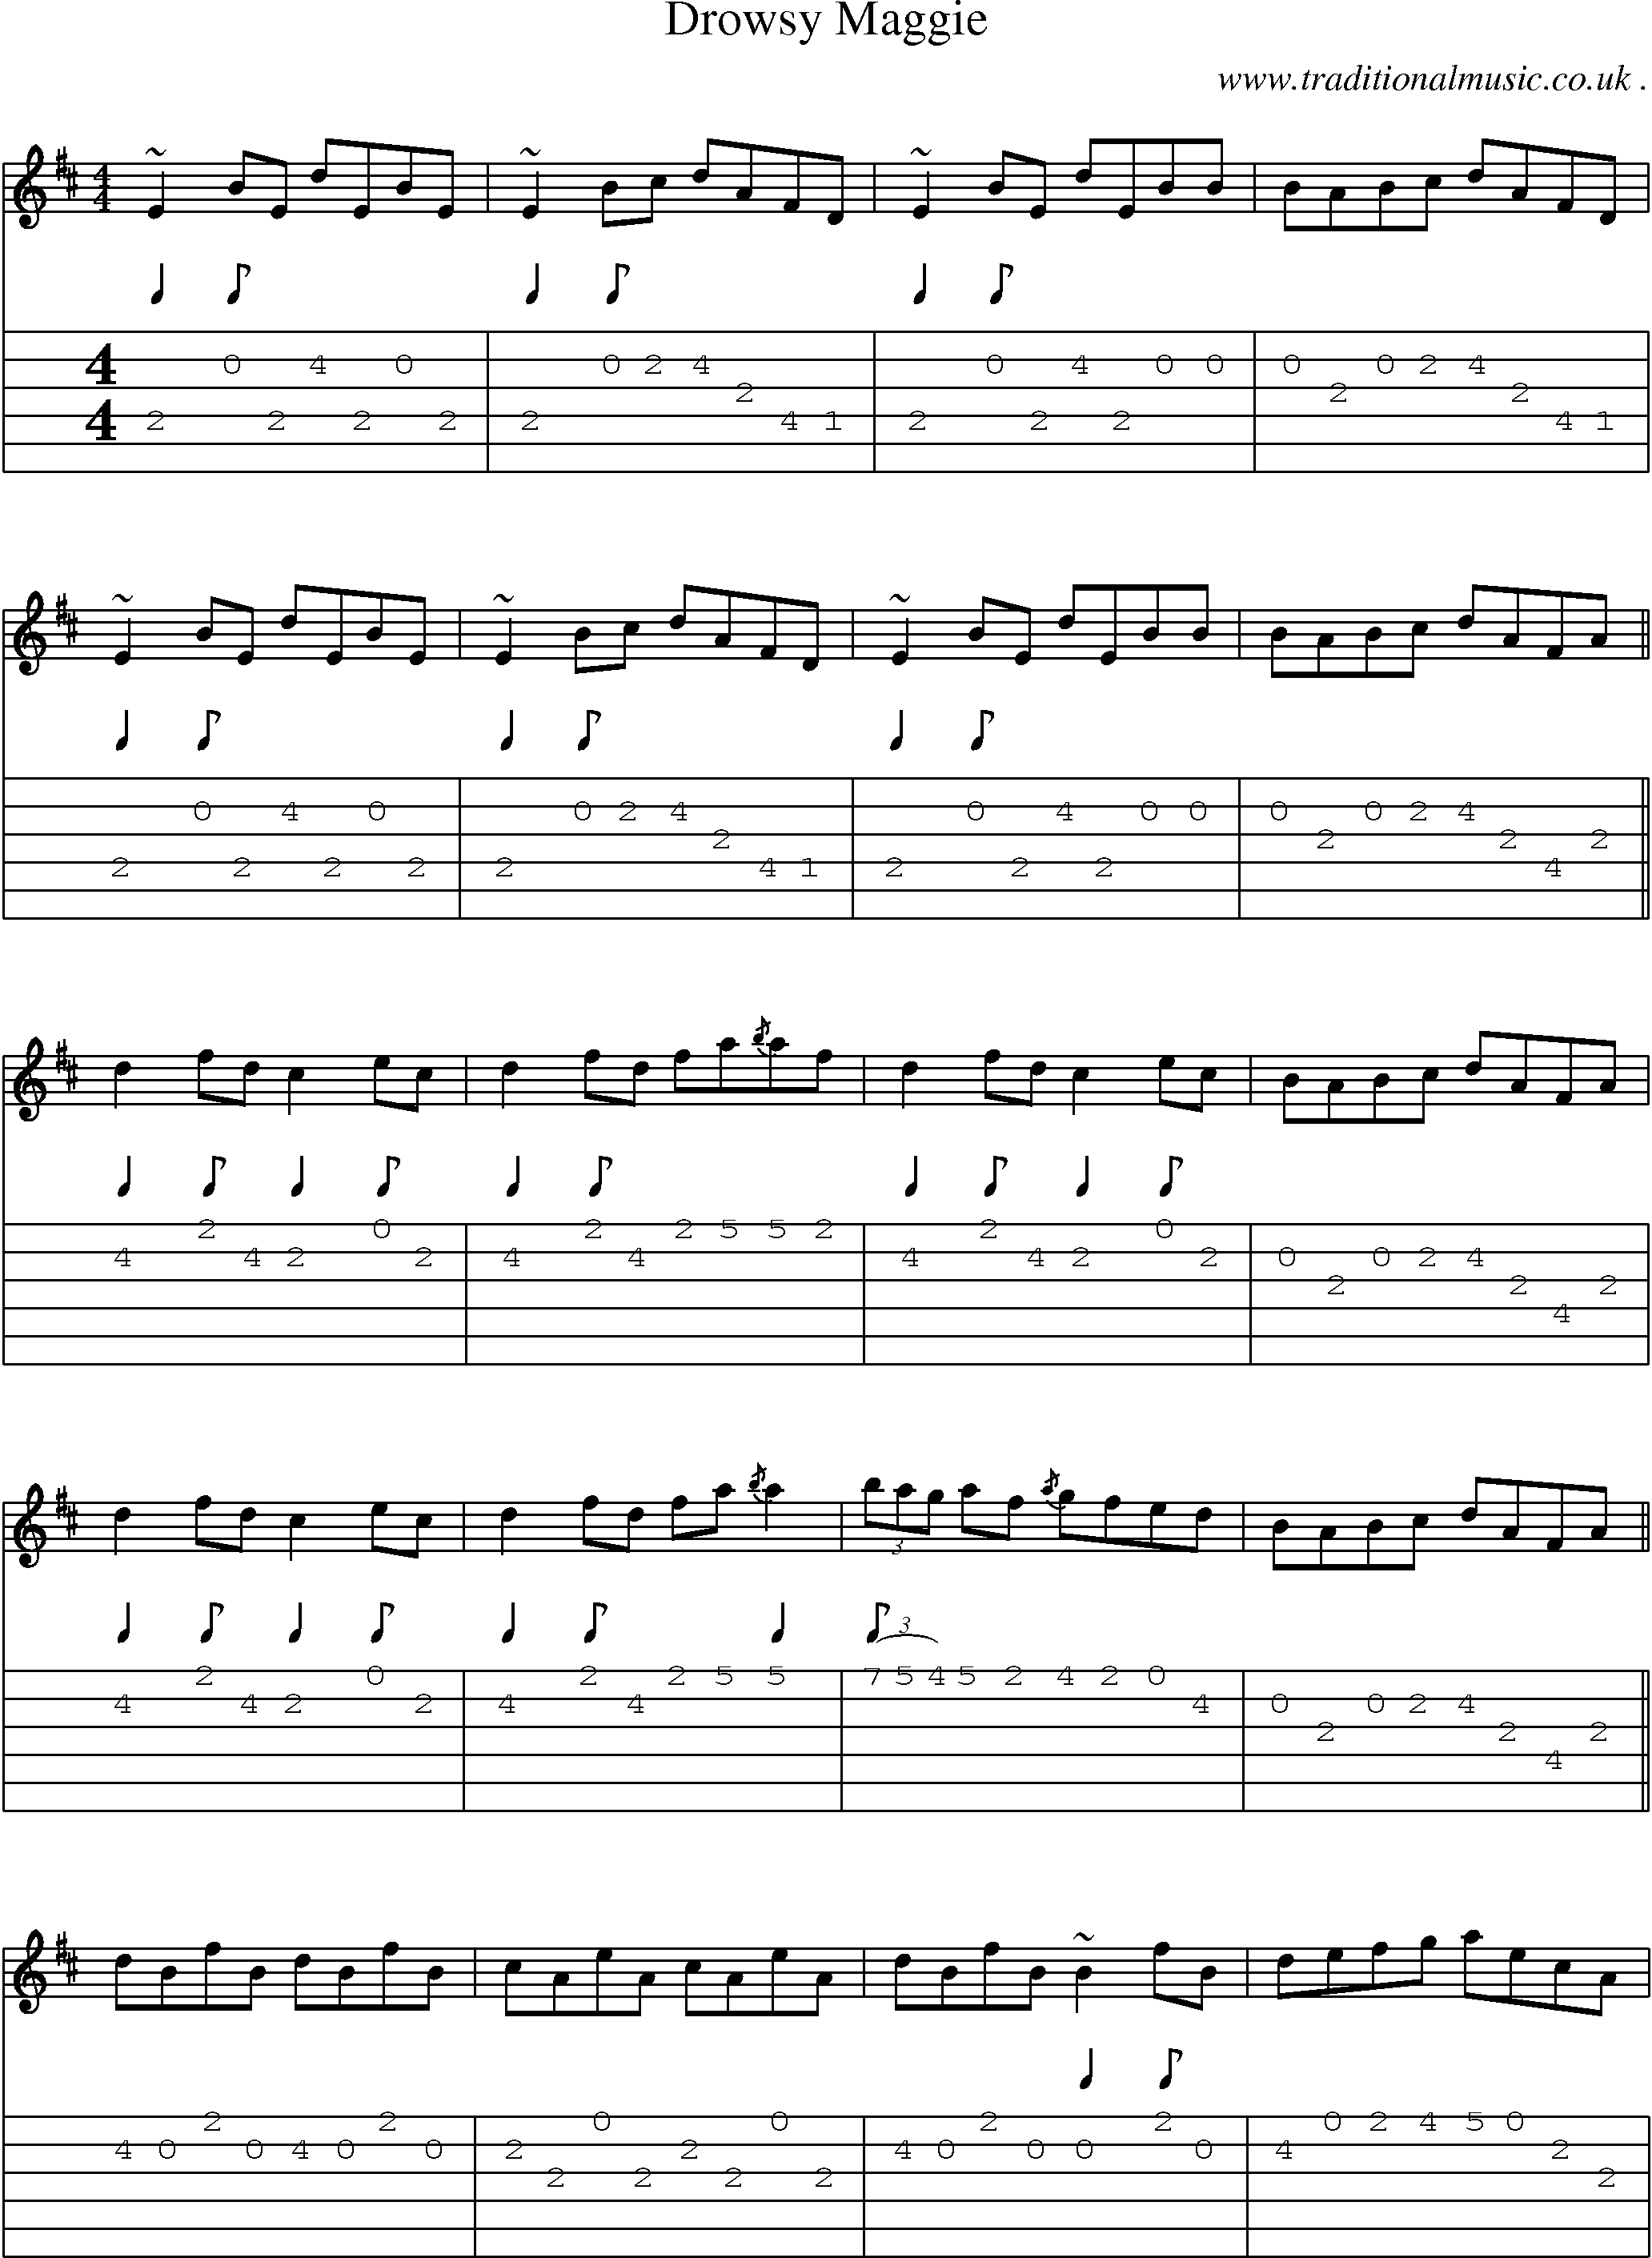 Sheet-music  score, Chords and Guitar Tabs for Drowsy Maggie